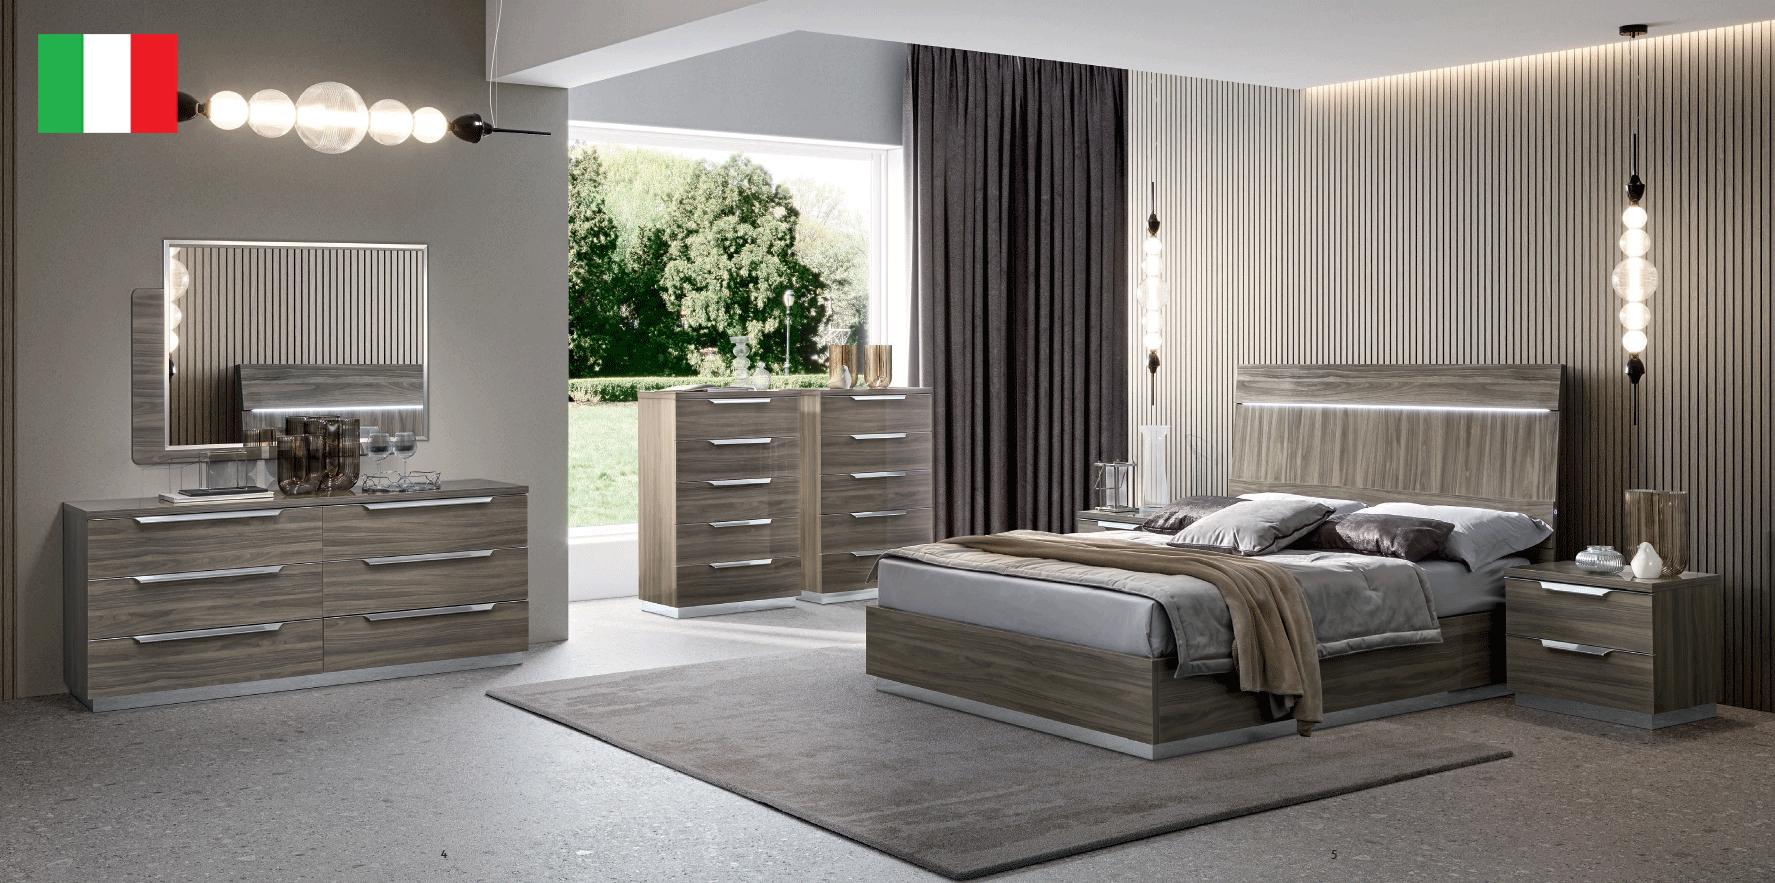 Bedroom Furniture Classic Bedrooms QS and KS Kroma Bedroom GREY by Camelgroup – Italy